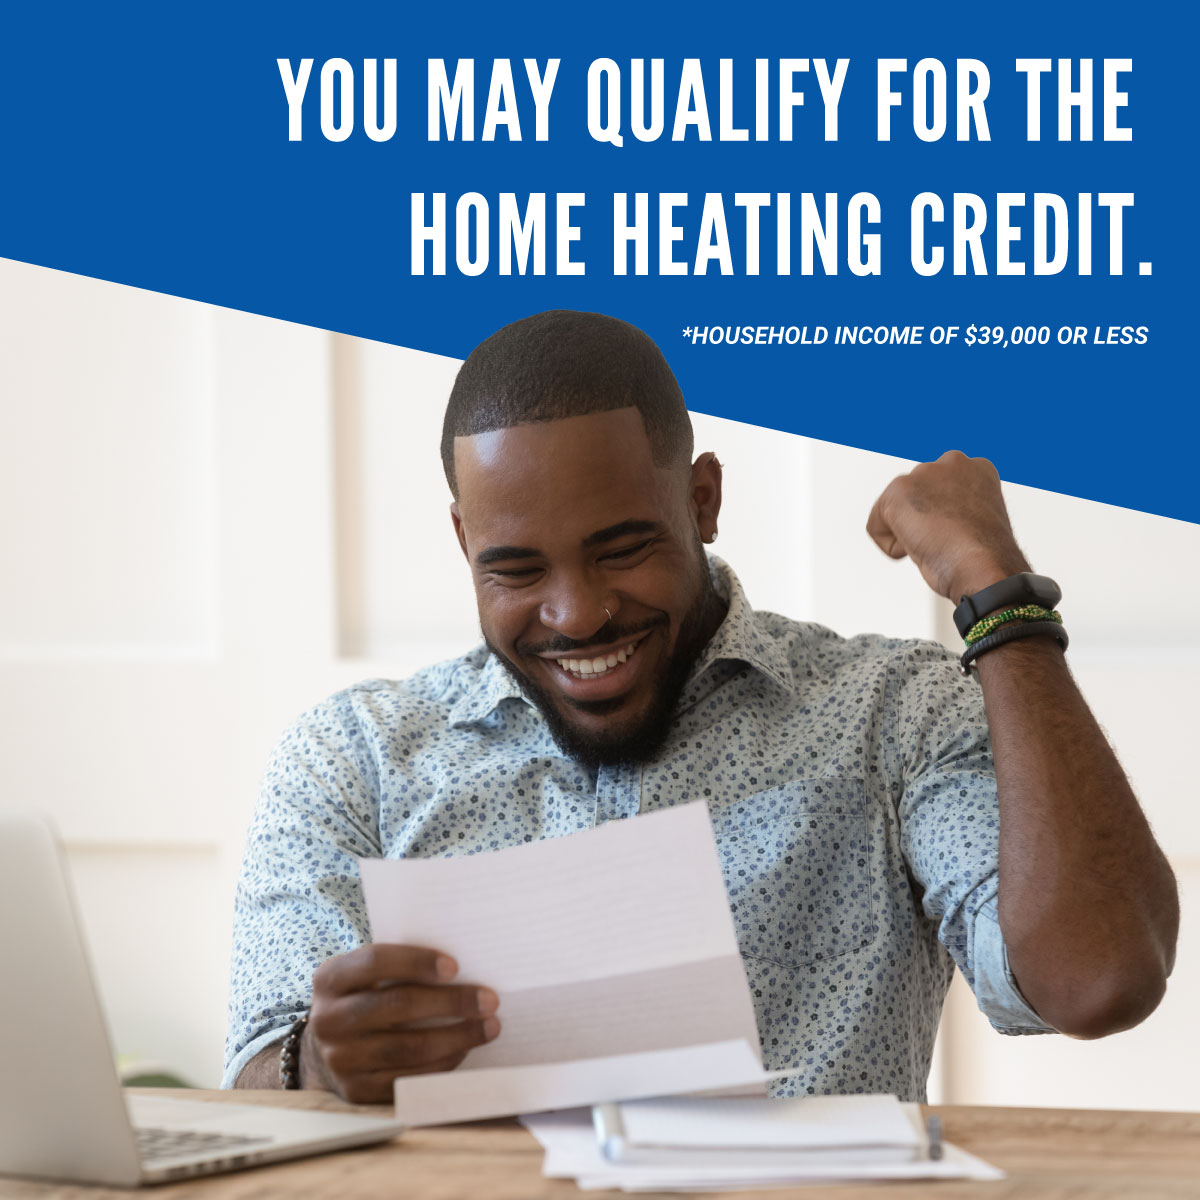 How Long Does It Take To Get Home Heating Credit